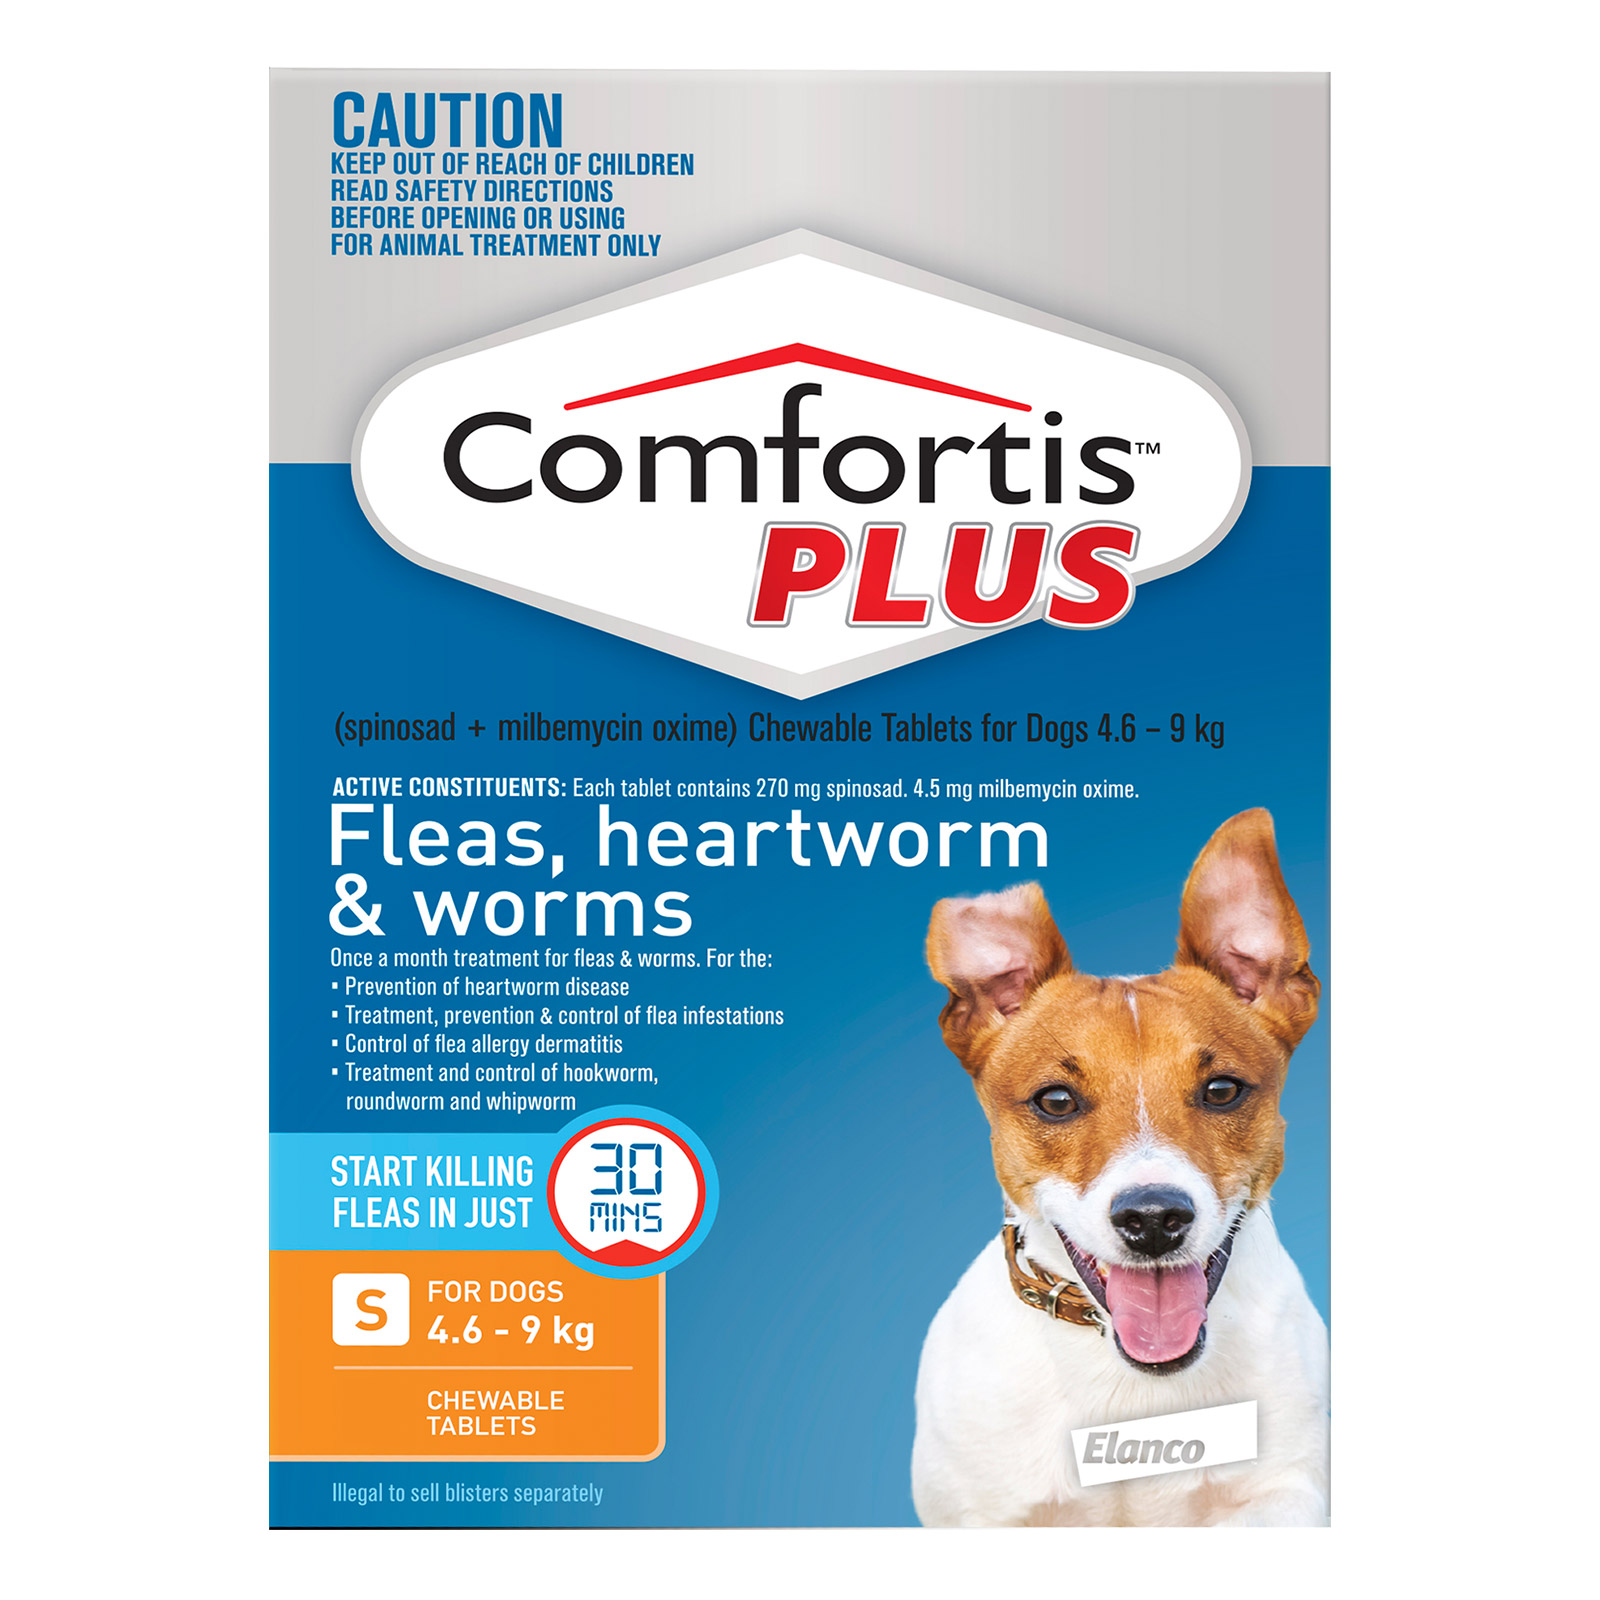 Comfortis Plus For Small Dogs 4.6-9 Kg 10.1 - 20lbs Orange 6 Chews
